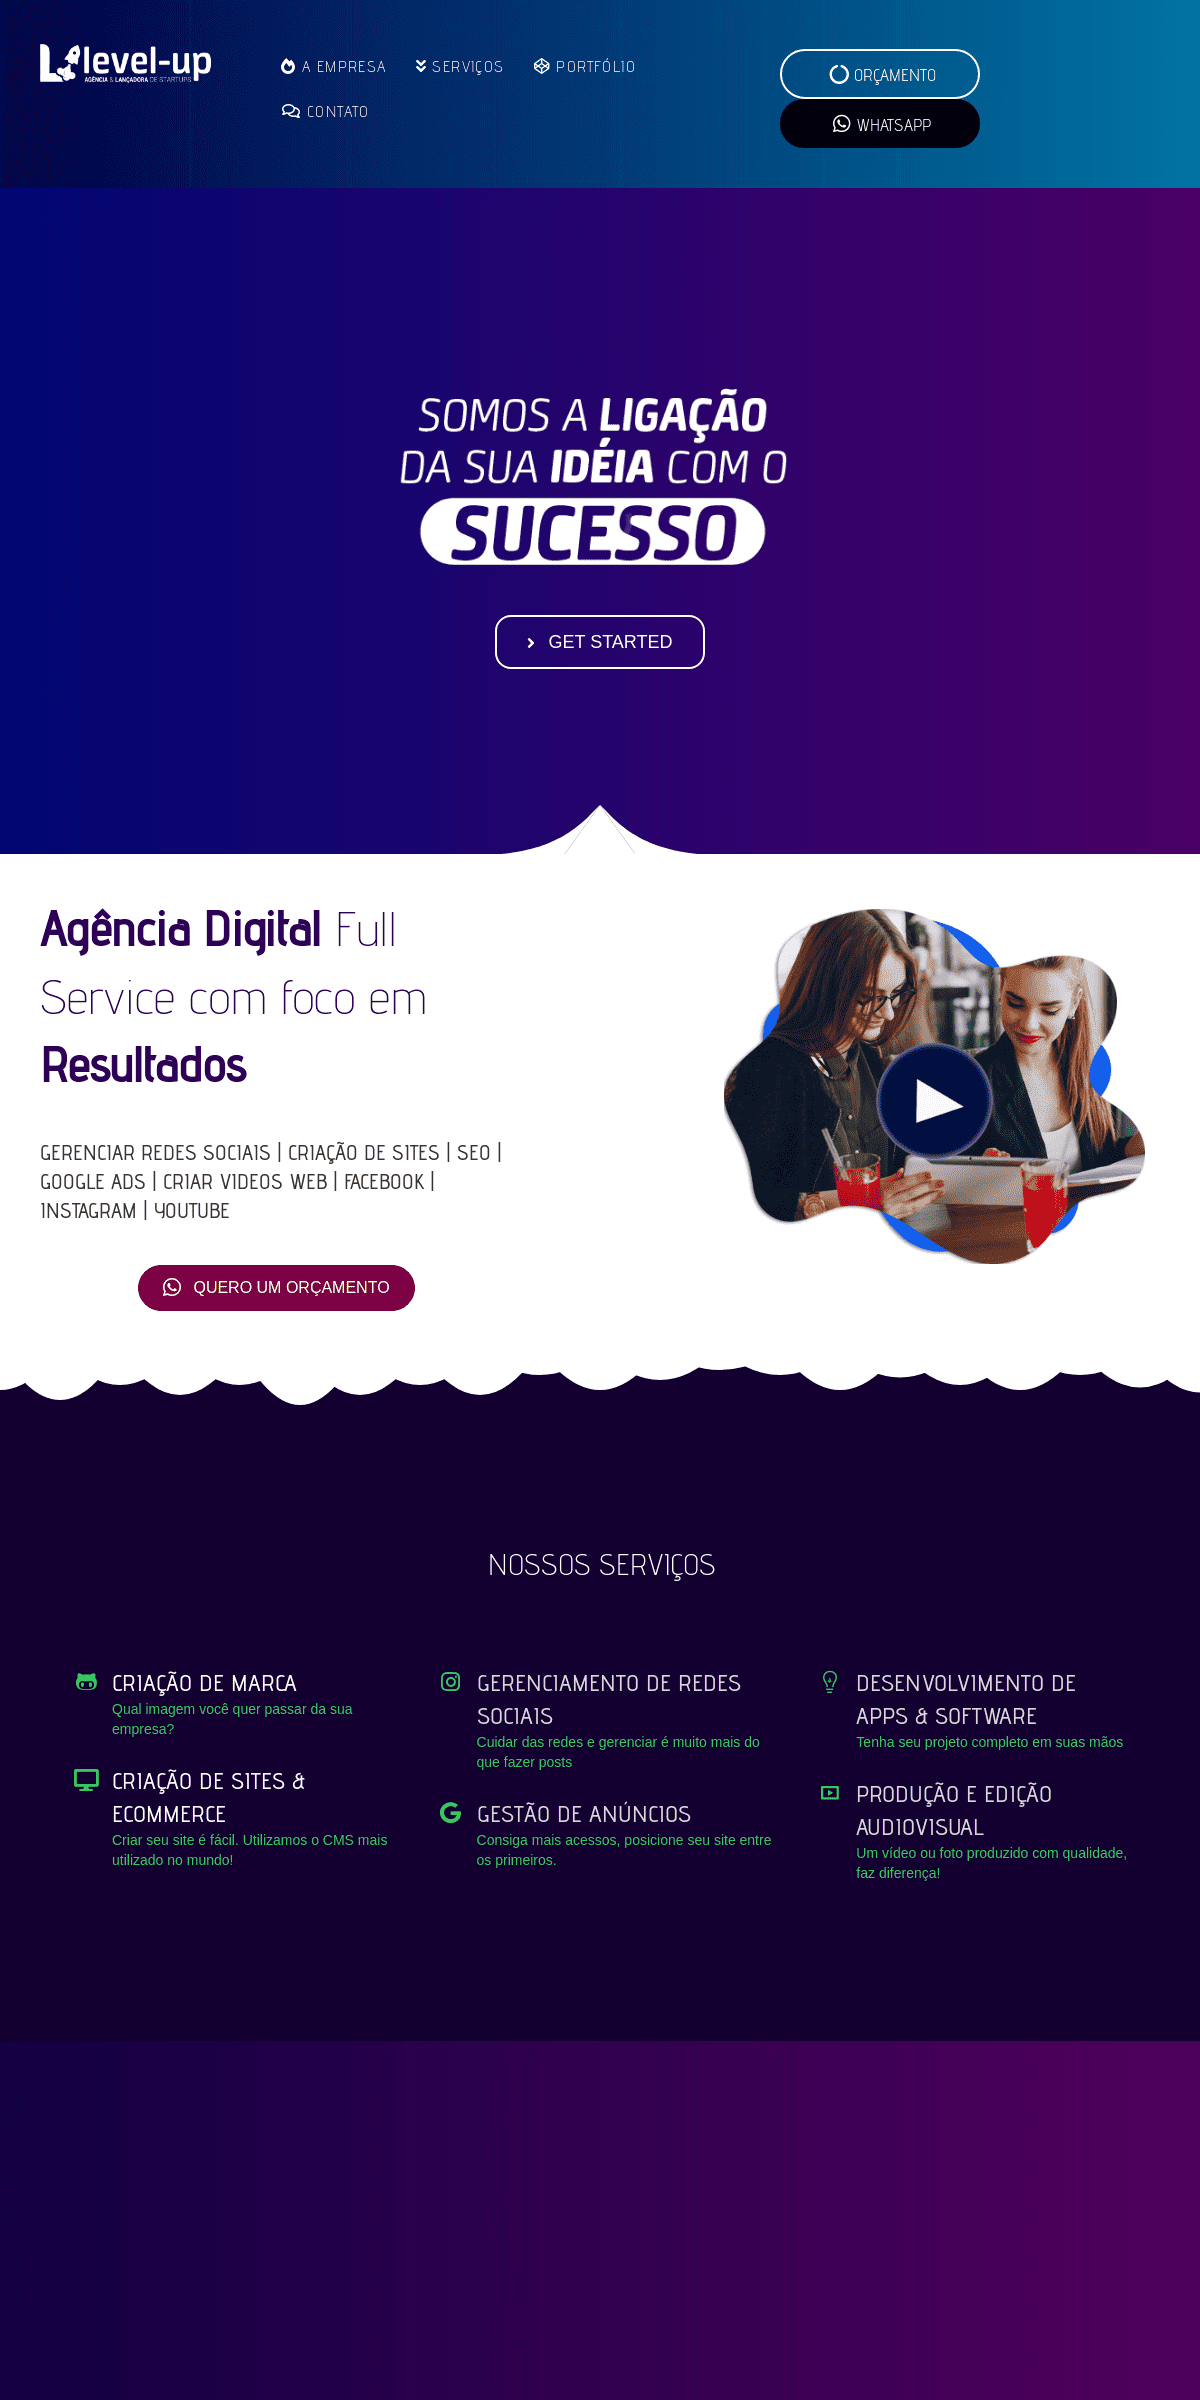 A complete backup of agencialevelup.com